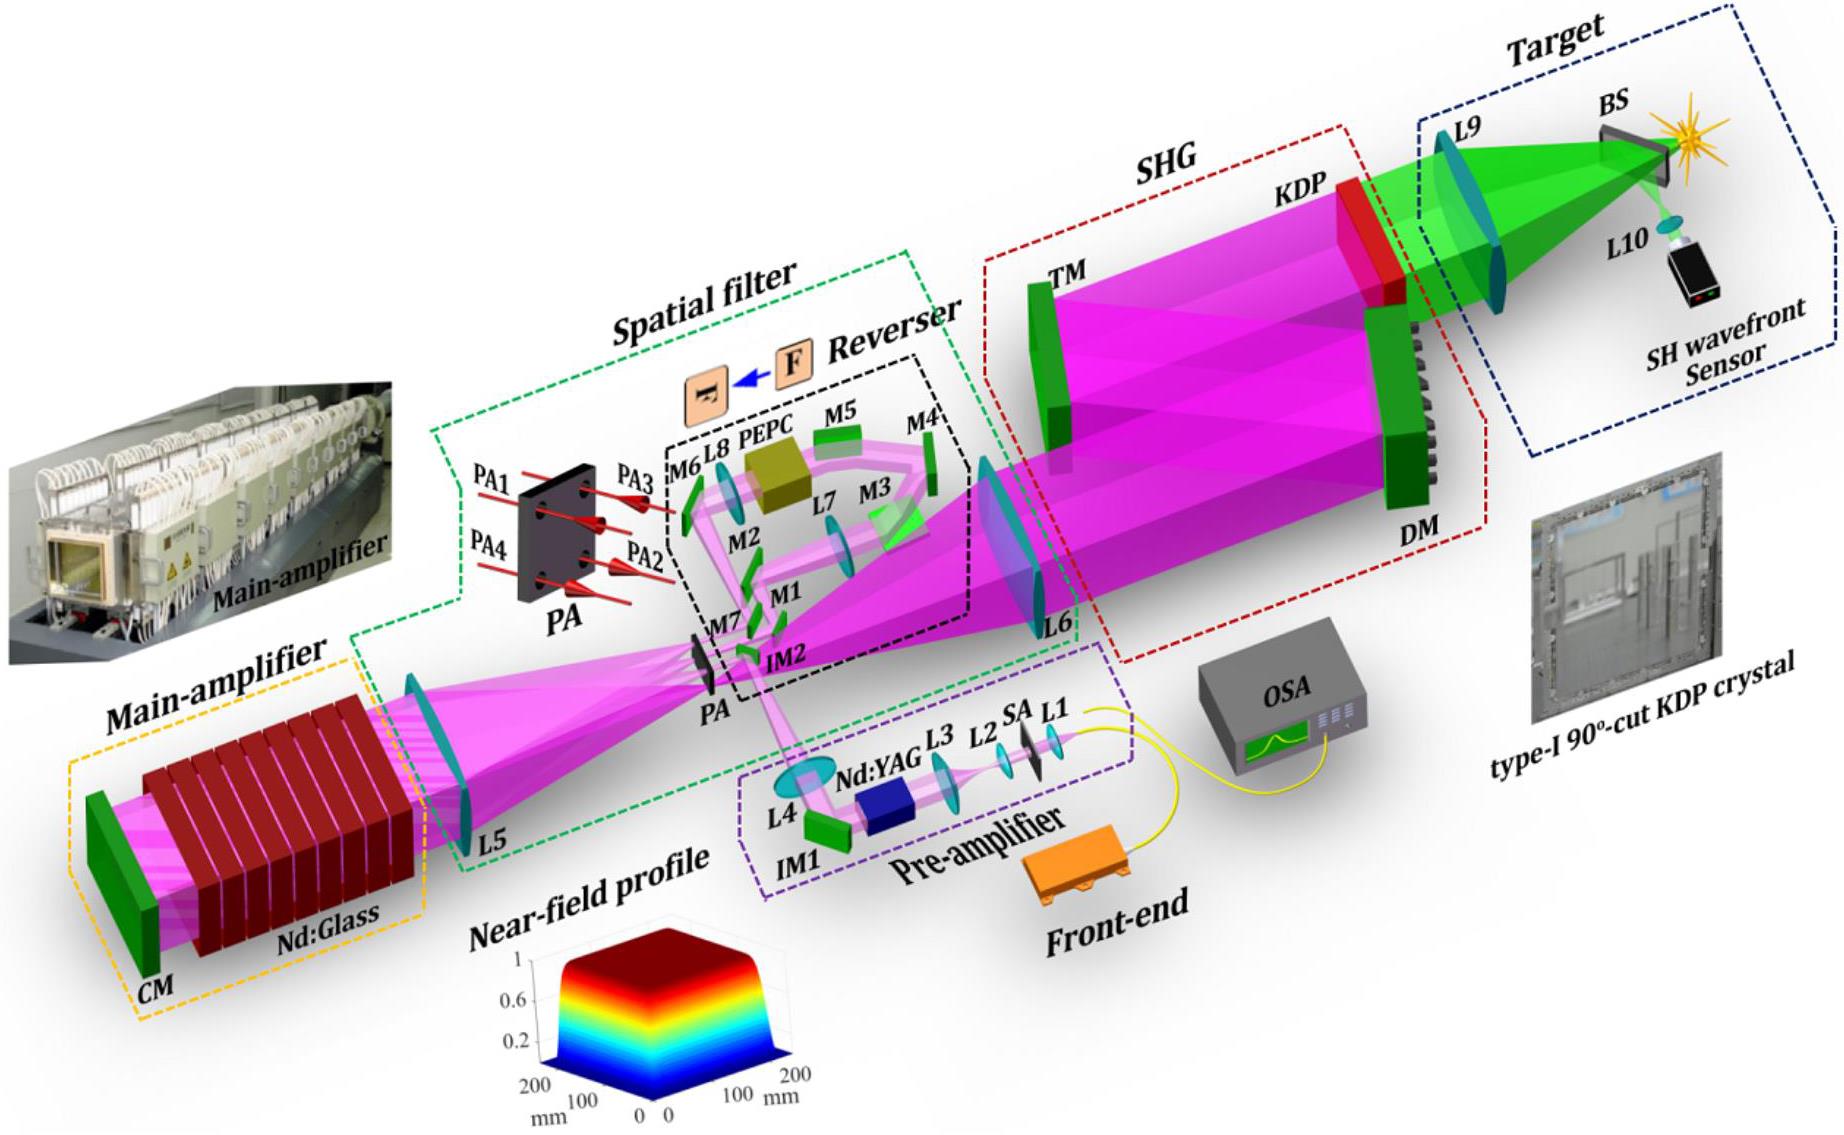 Schematic diagram of the 1178 J near diffraction limited 527 nm laser system using off-axis multi-pass amplification and complete closed-loop AO. BS, beamsplitter; CM, cavity mirror; DM, deformable mirror; L1–L10, focus lenses; M1–M7, IM1 and IM2, reflection mirrors; OSA, optical spectrum analyzer; PA, pinhole array; PEPC, plasma-electrode Pockels cell; SA, square aperture; TM, transport mirror.